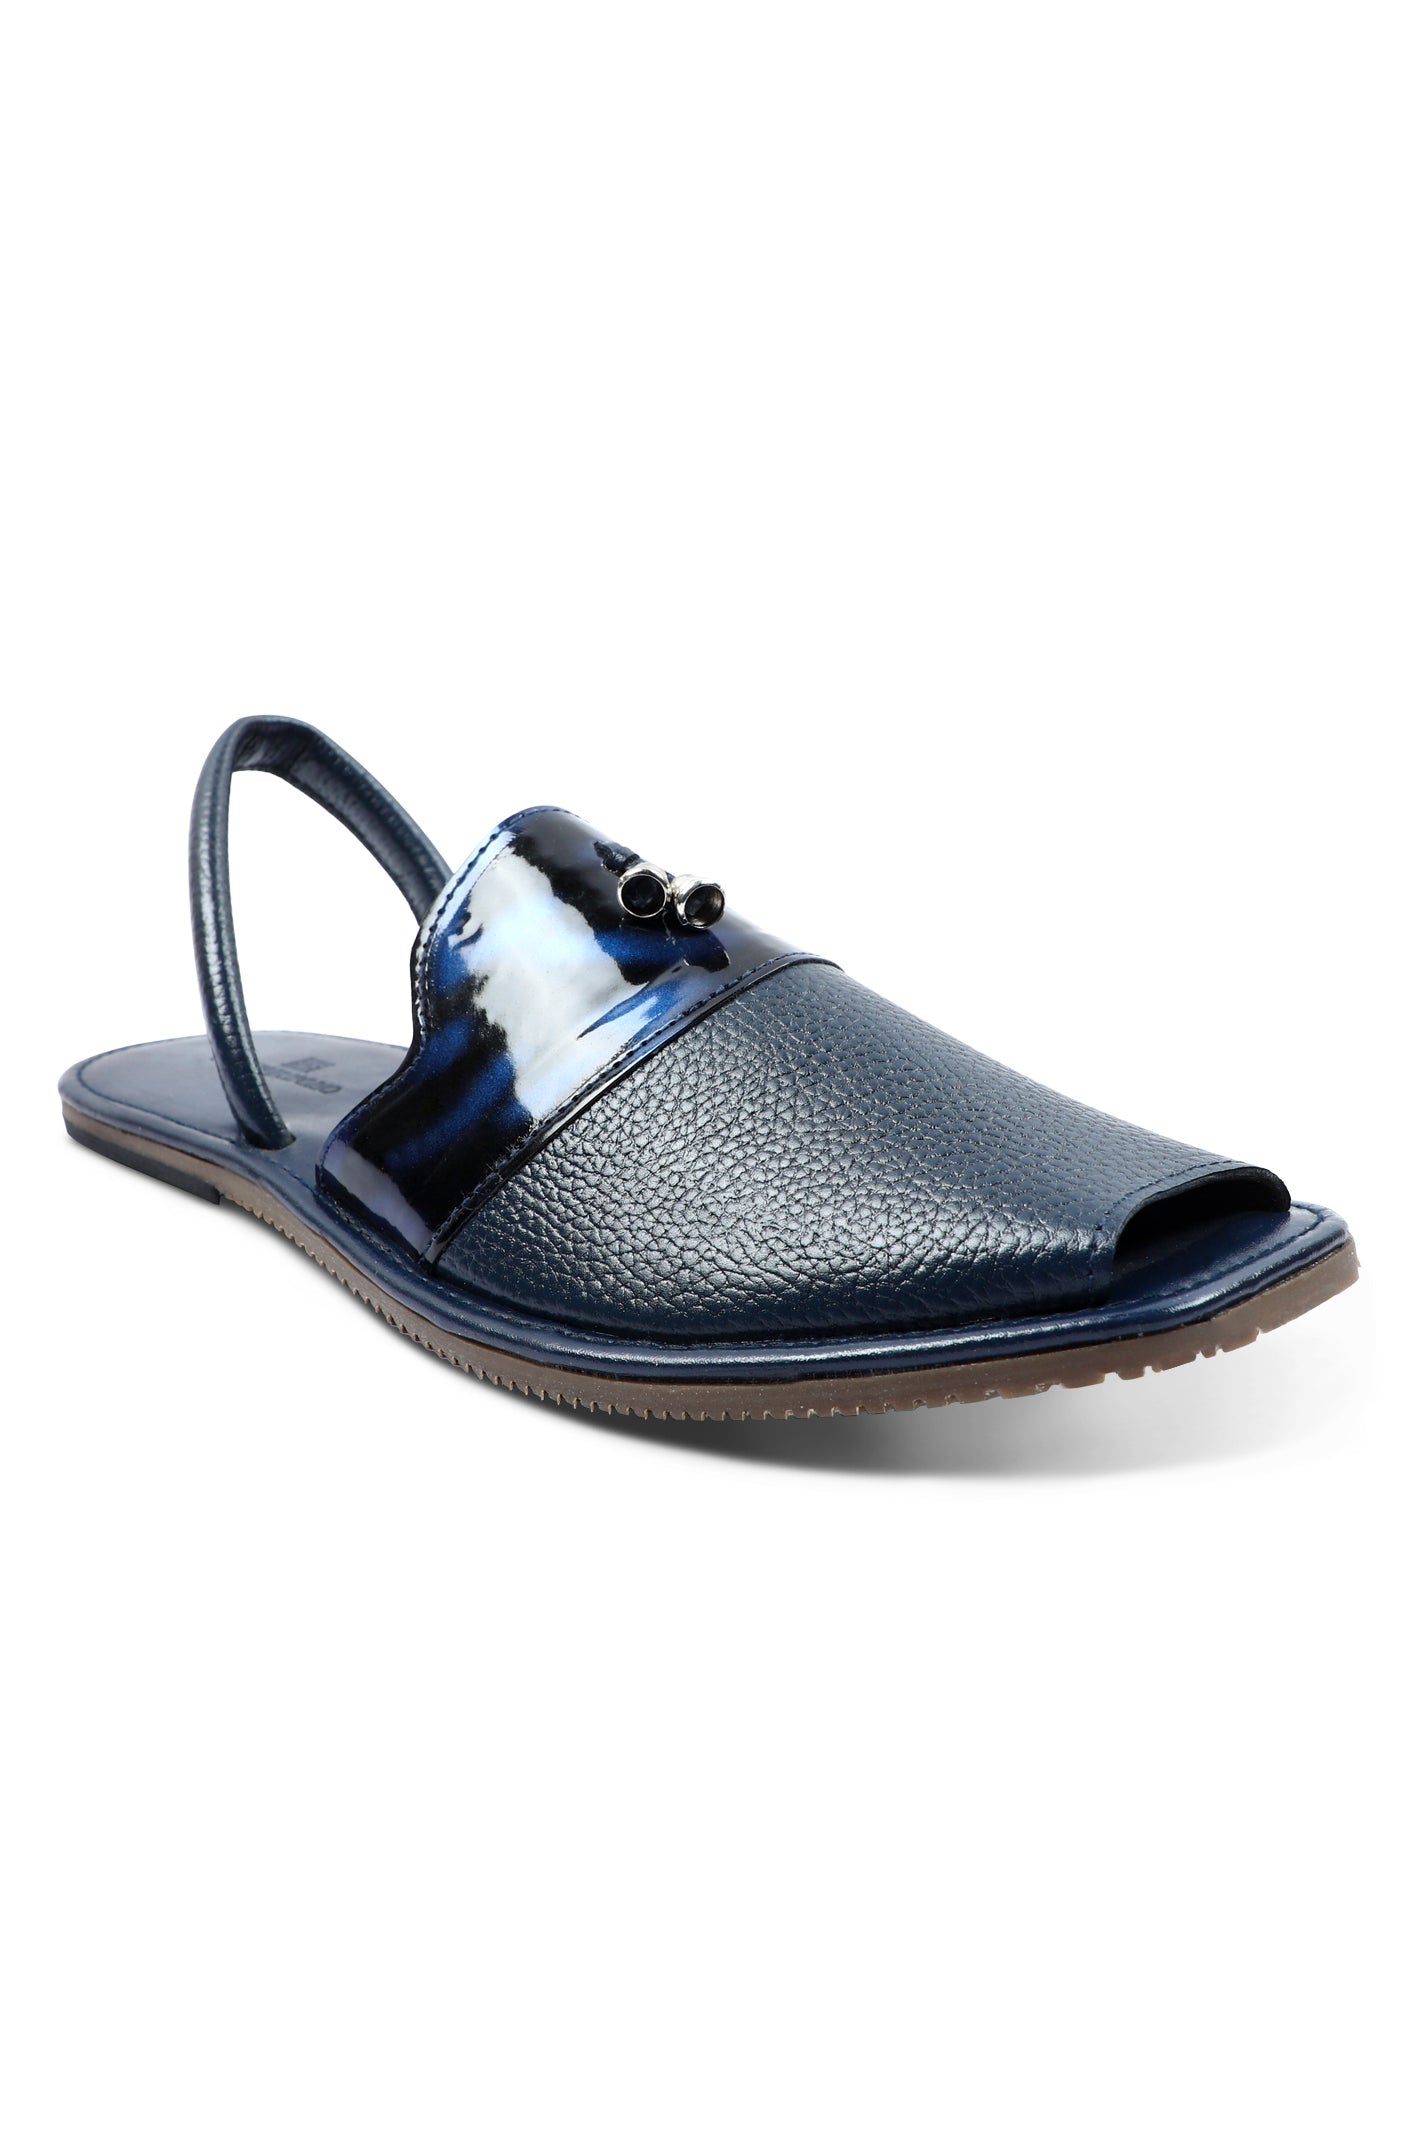 French Emporio Men Sandals SKU: SLD-0033-NAVY - Diners